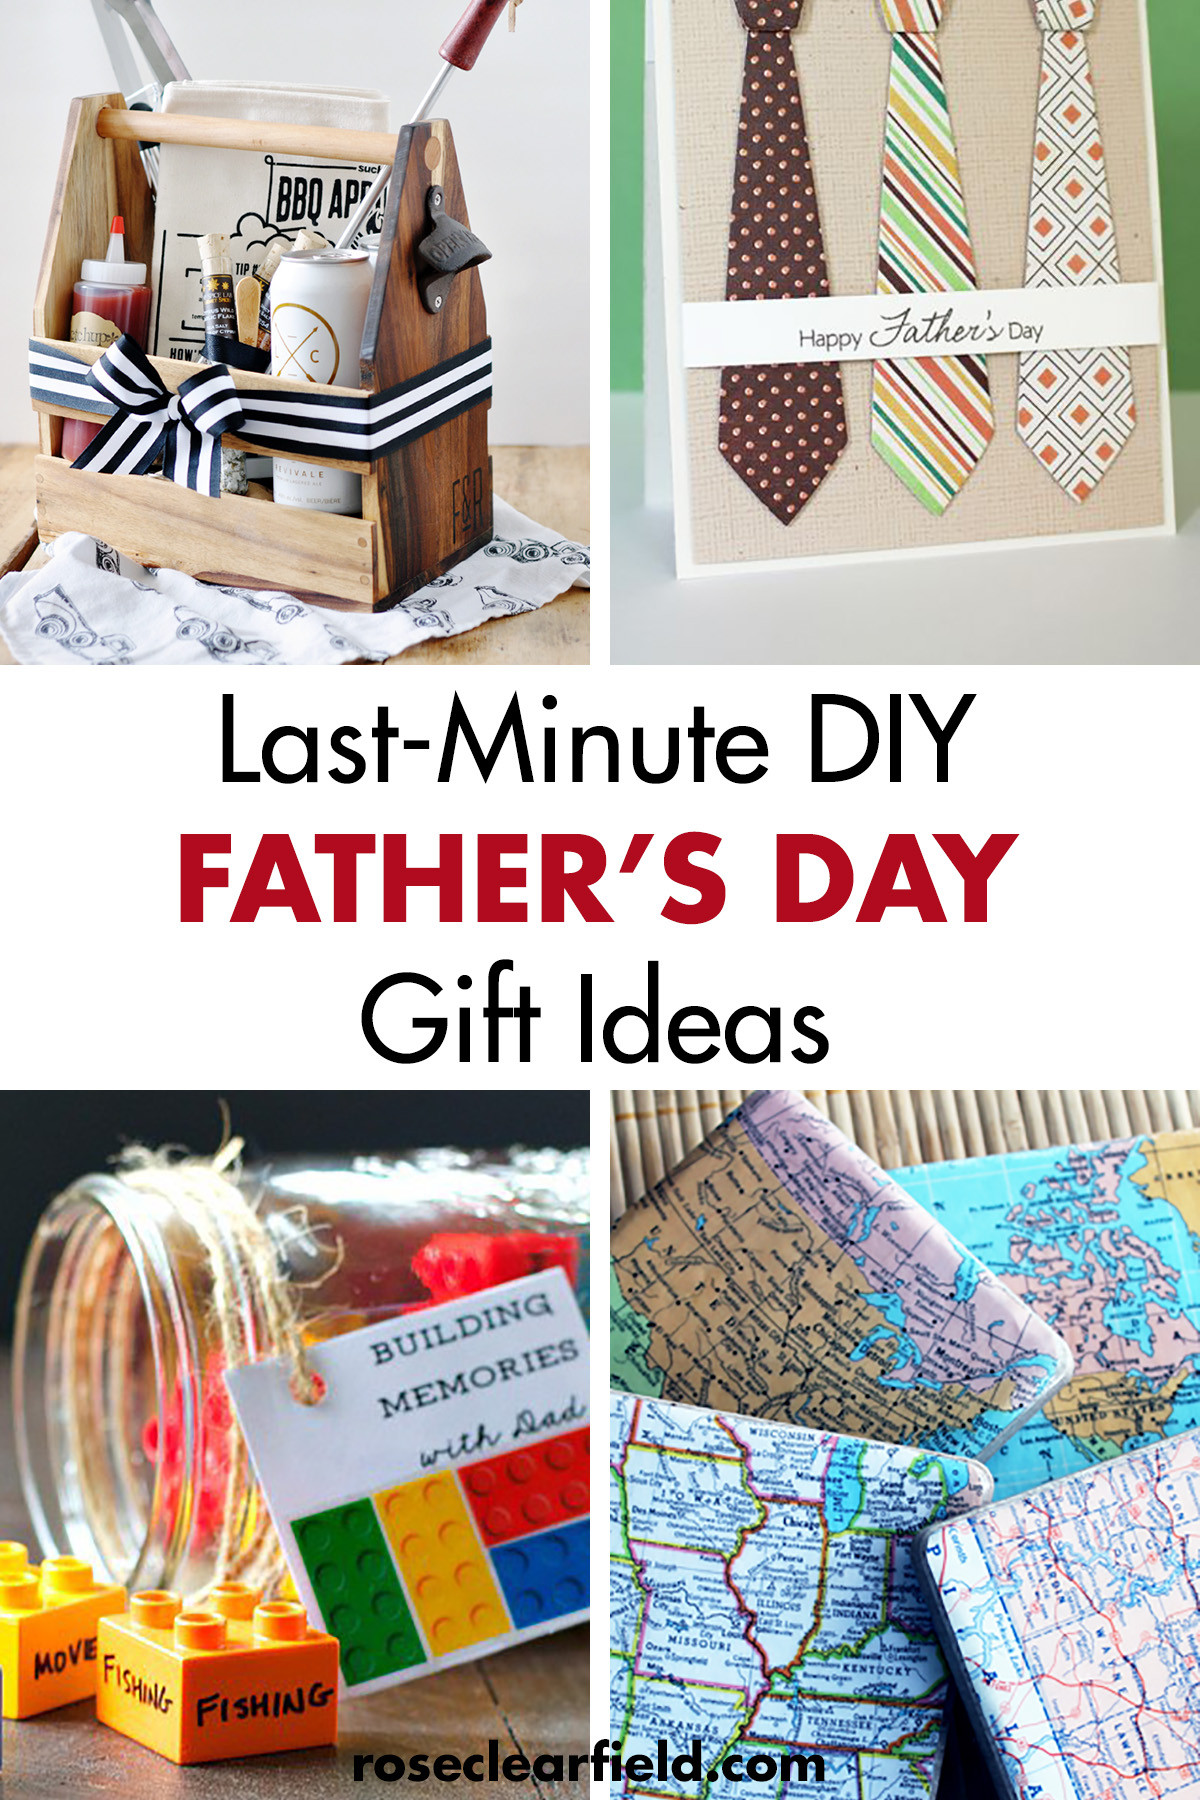 DIY Fathers Day Gift Ideas
 Last Minute DIY Father s Day Gift Ideas • Rose Clearfield